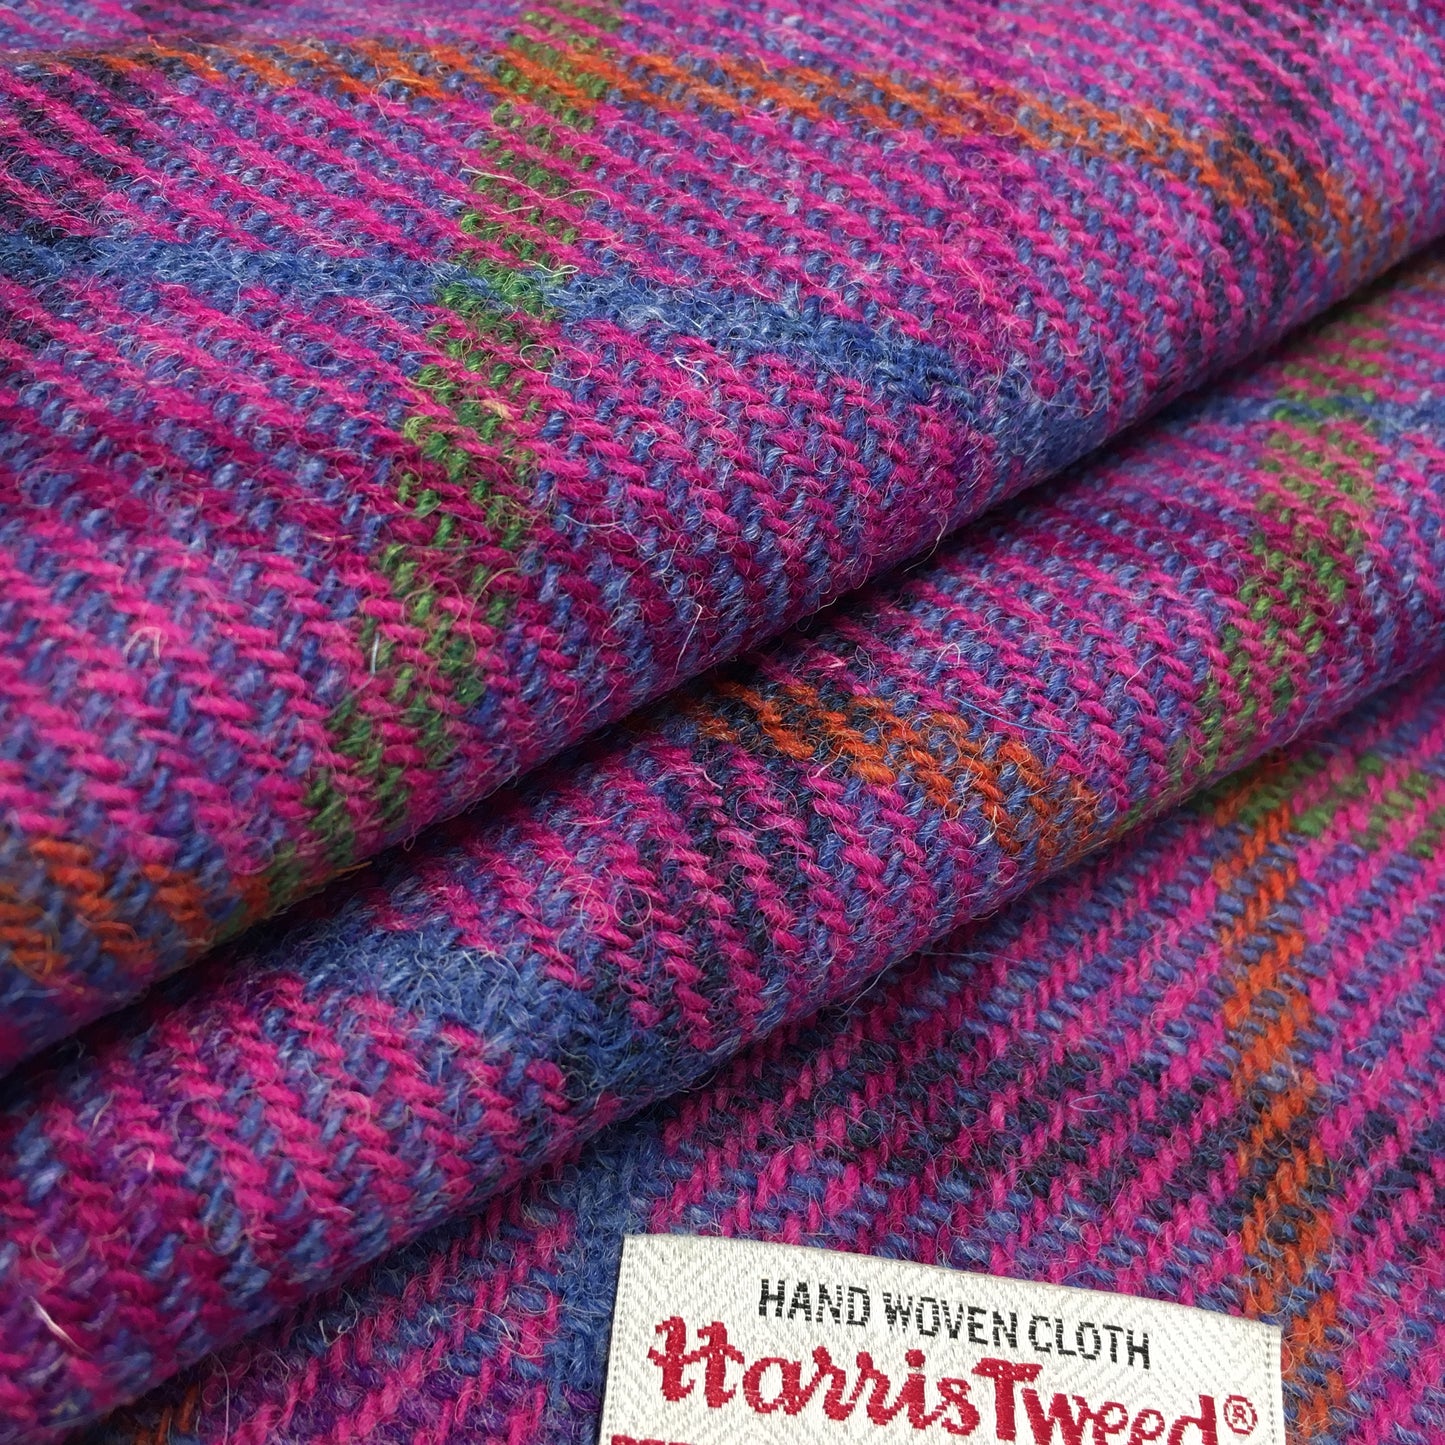 Bright Pink & Blue Diagonal Check With Cerise, Blue & Green Overcheck Harris Tweed